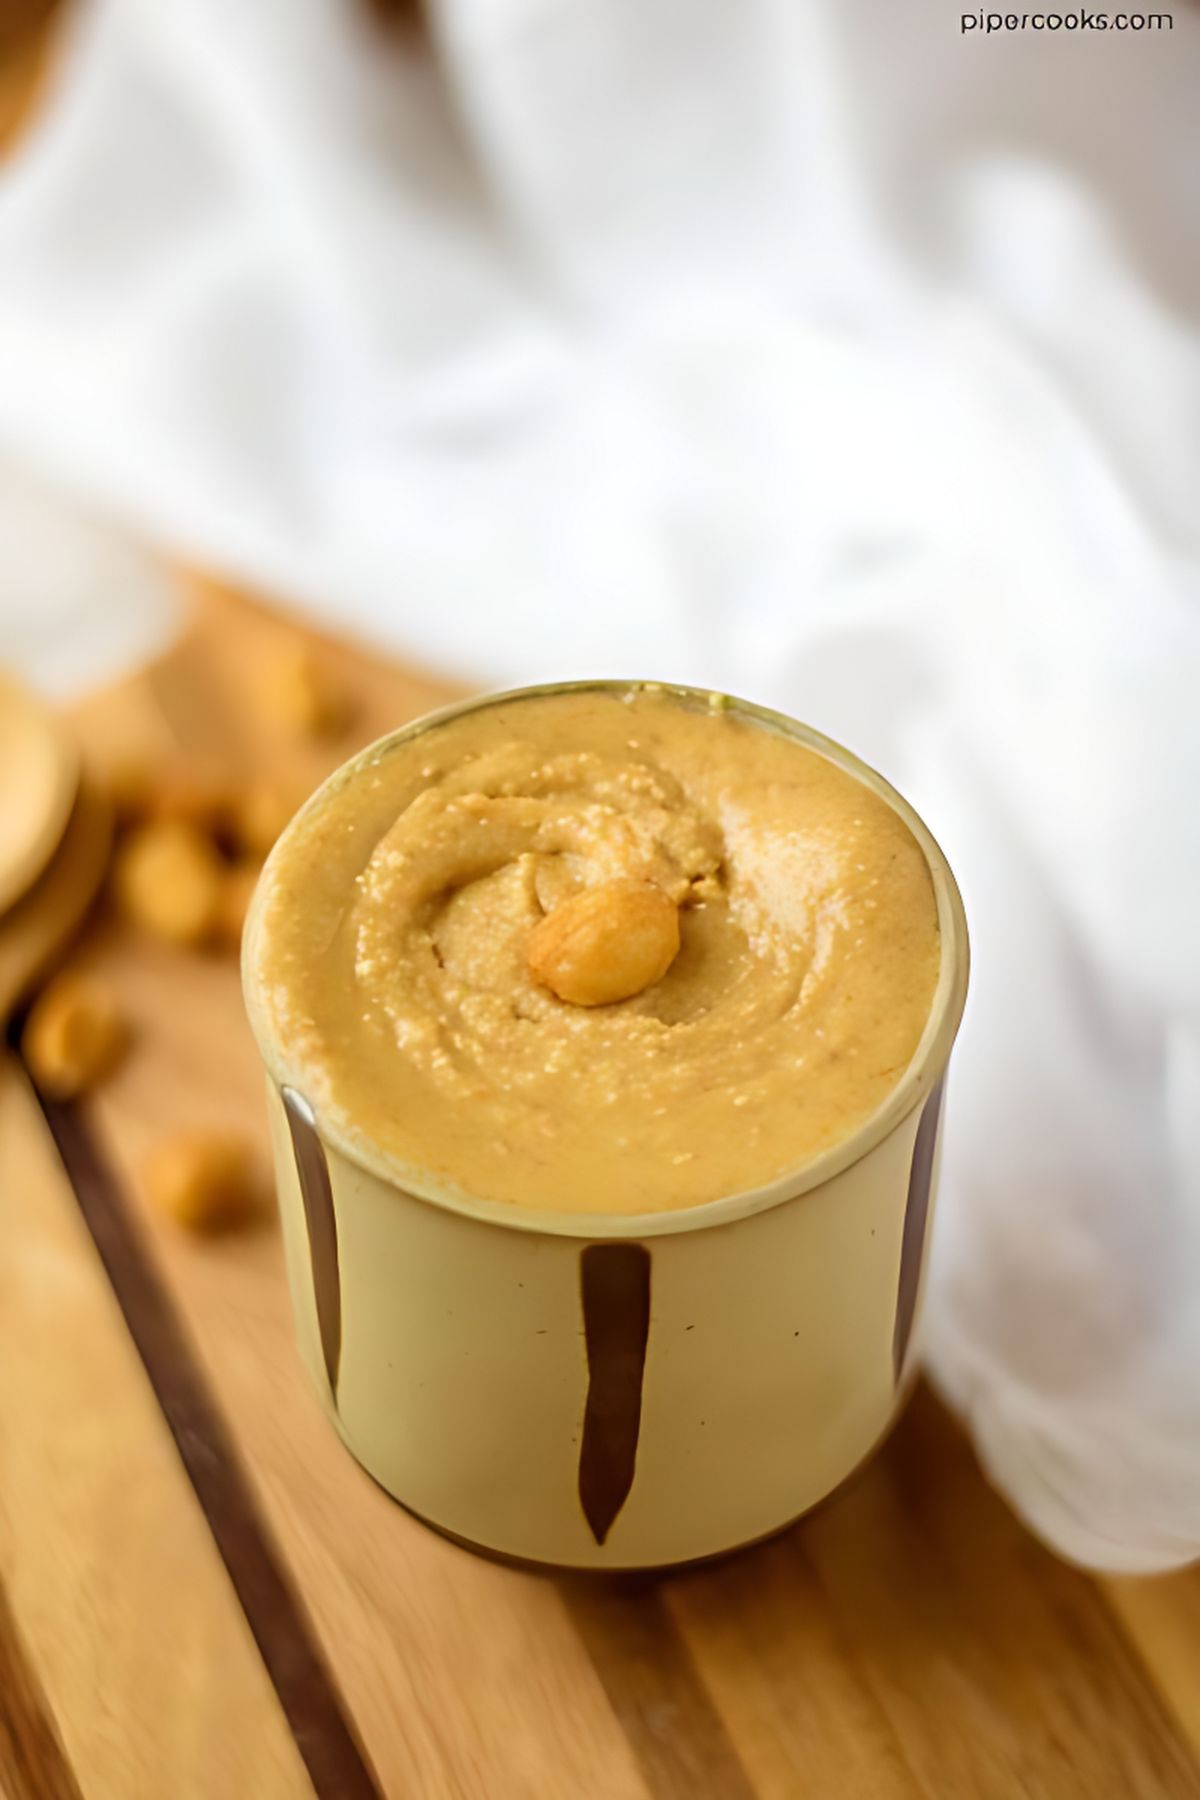 Honey Roasted Peanut Butter in a cup.